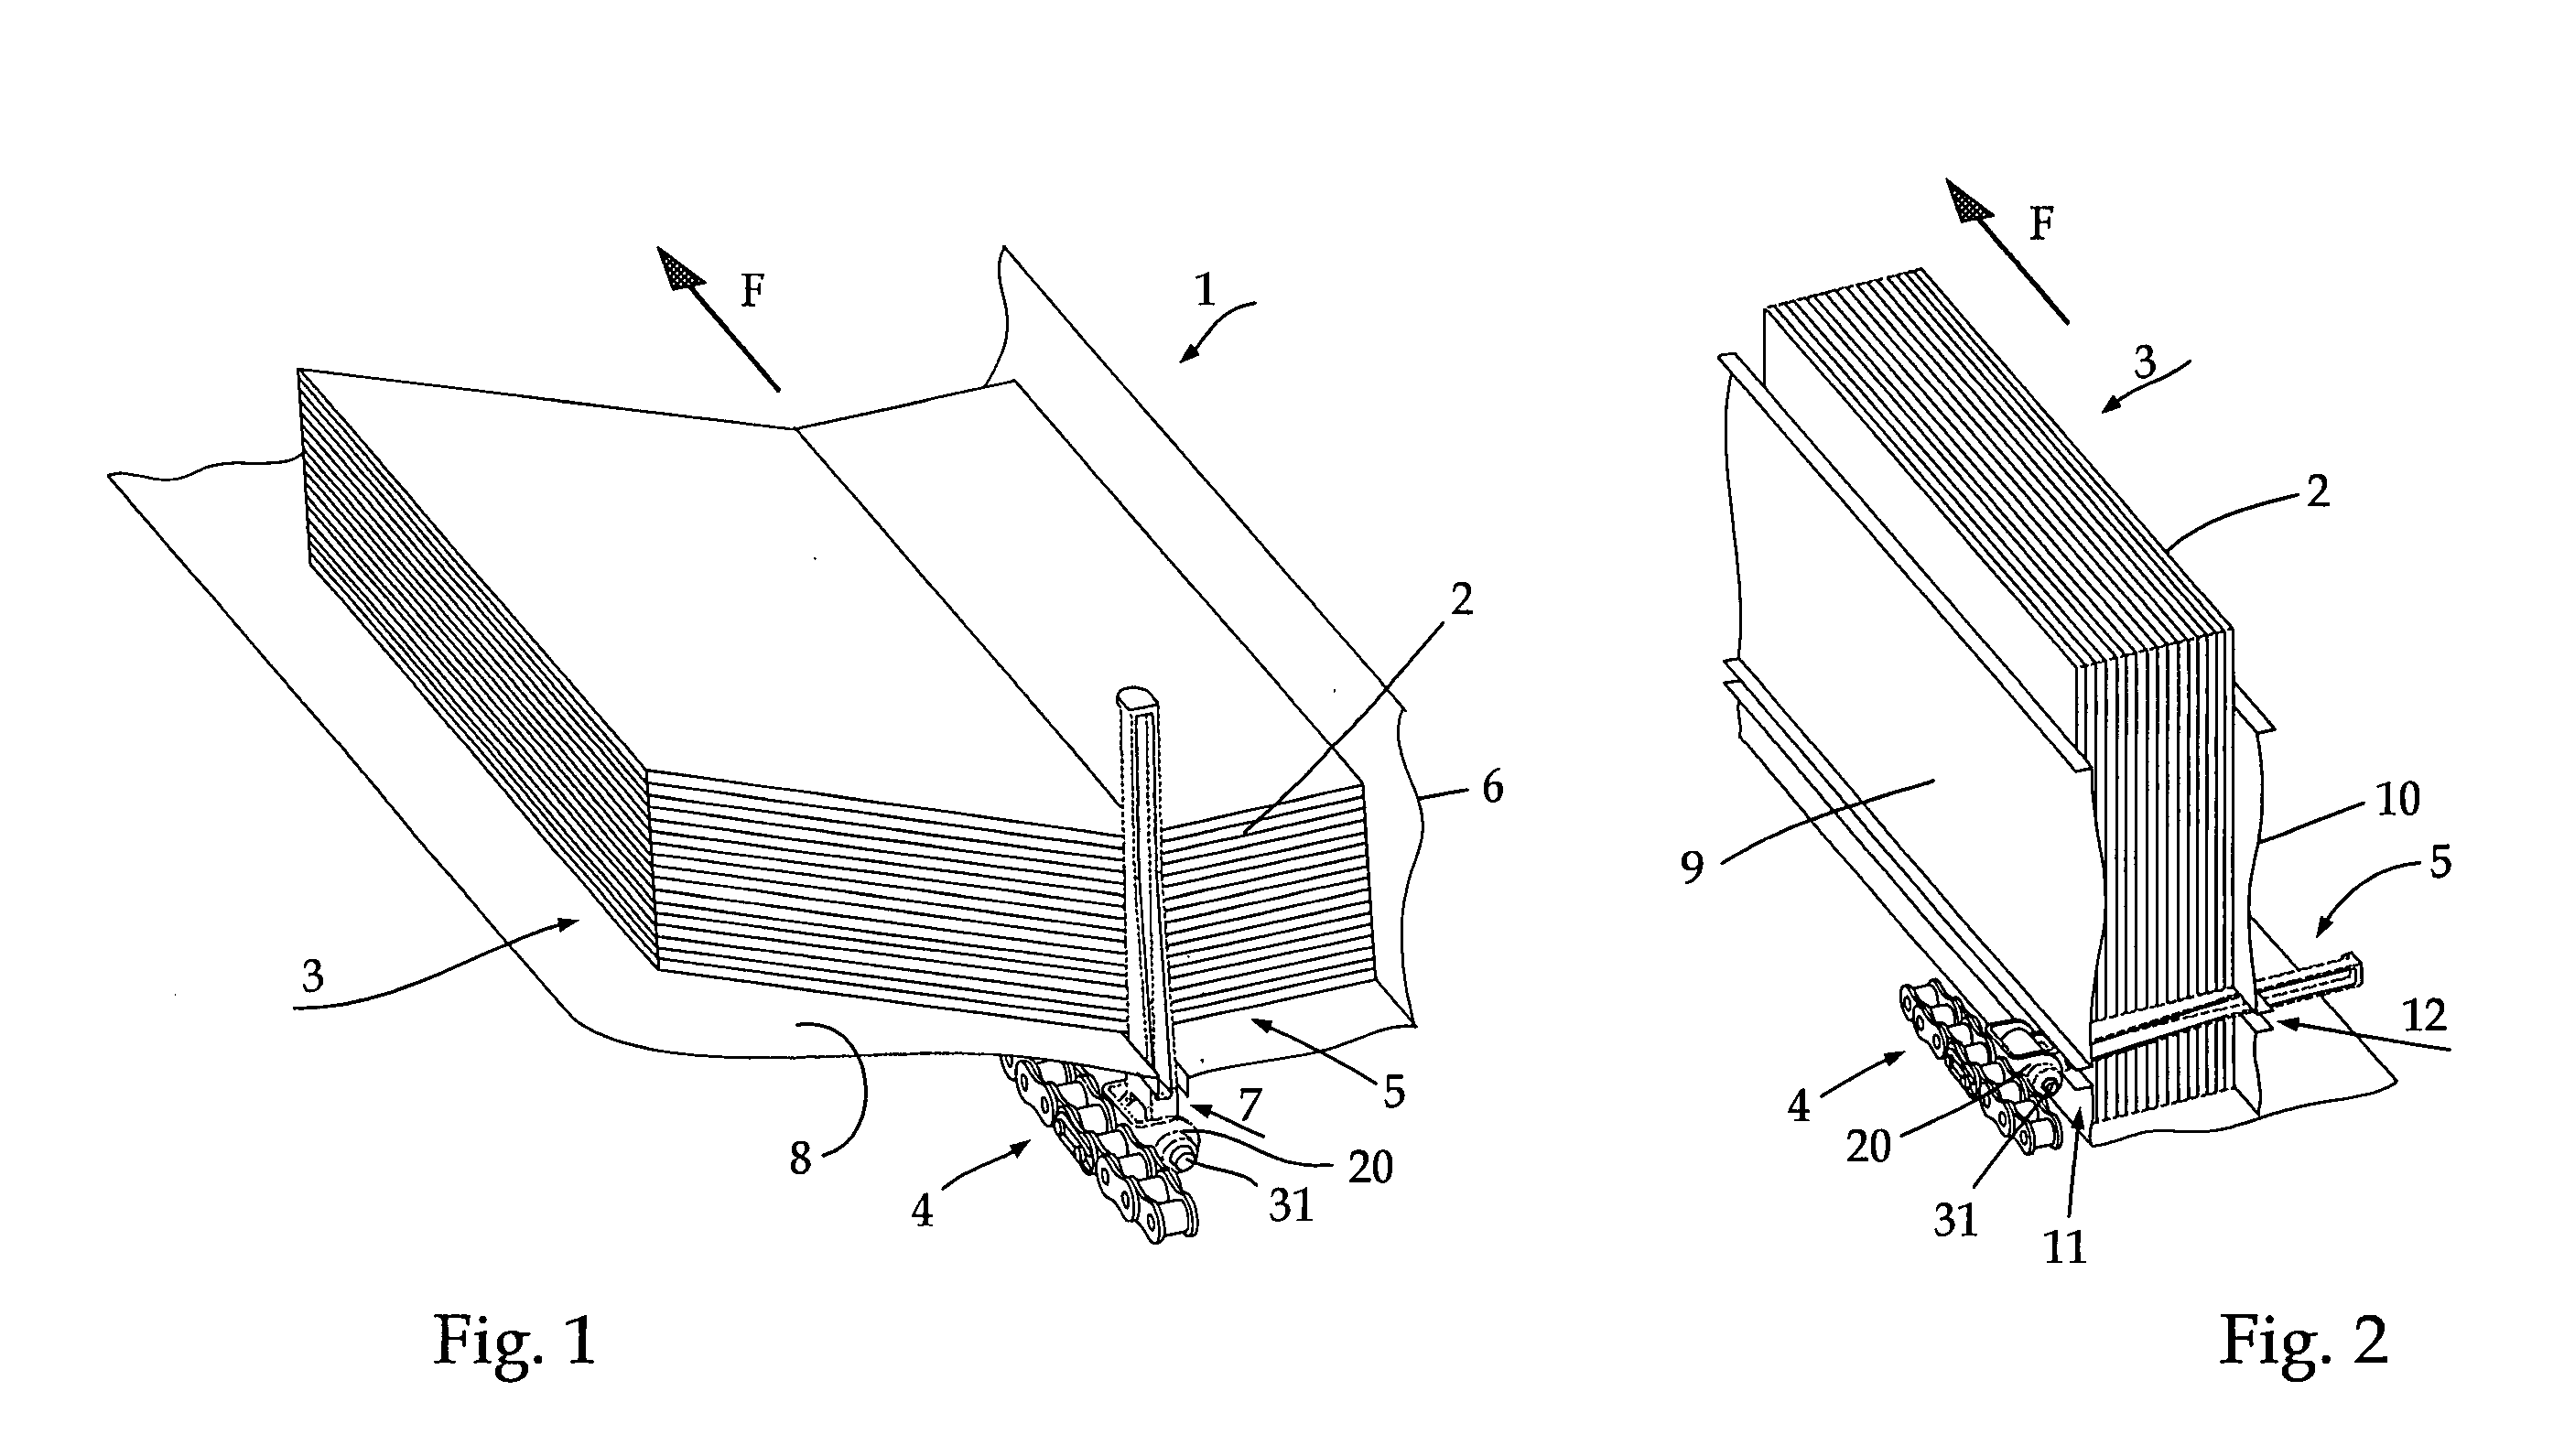 Device for conveying book blocks on a conveying line of a machine for producing books, magazines, or the like